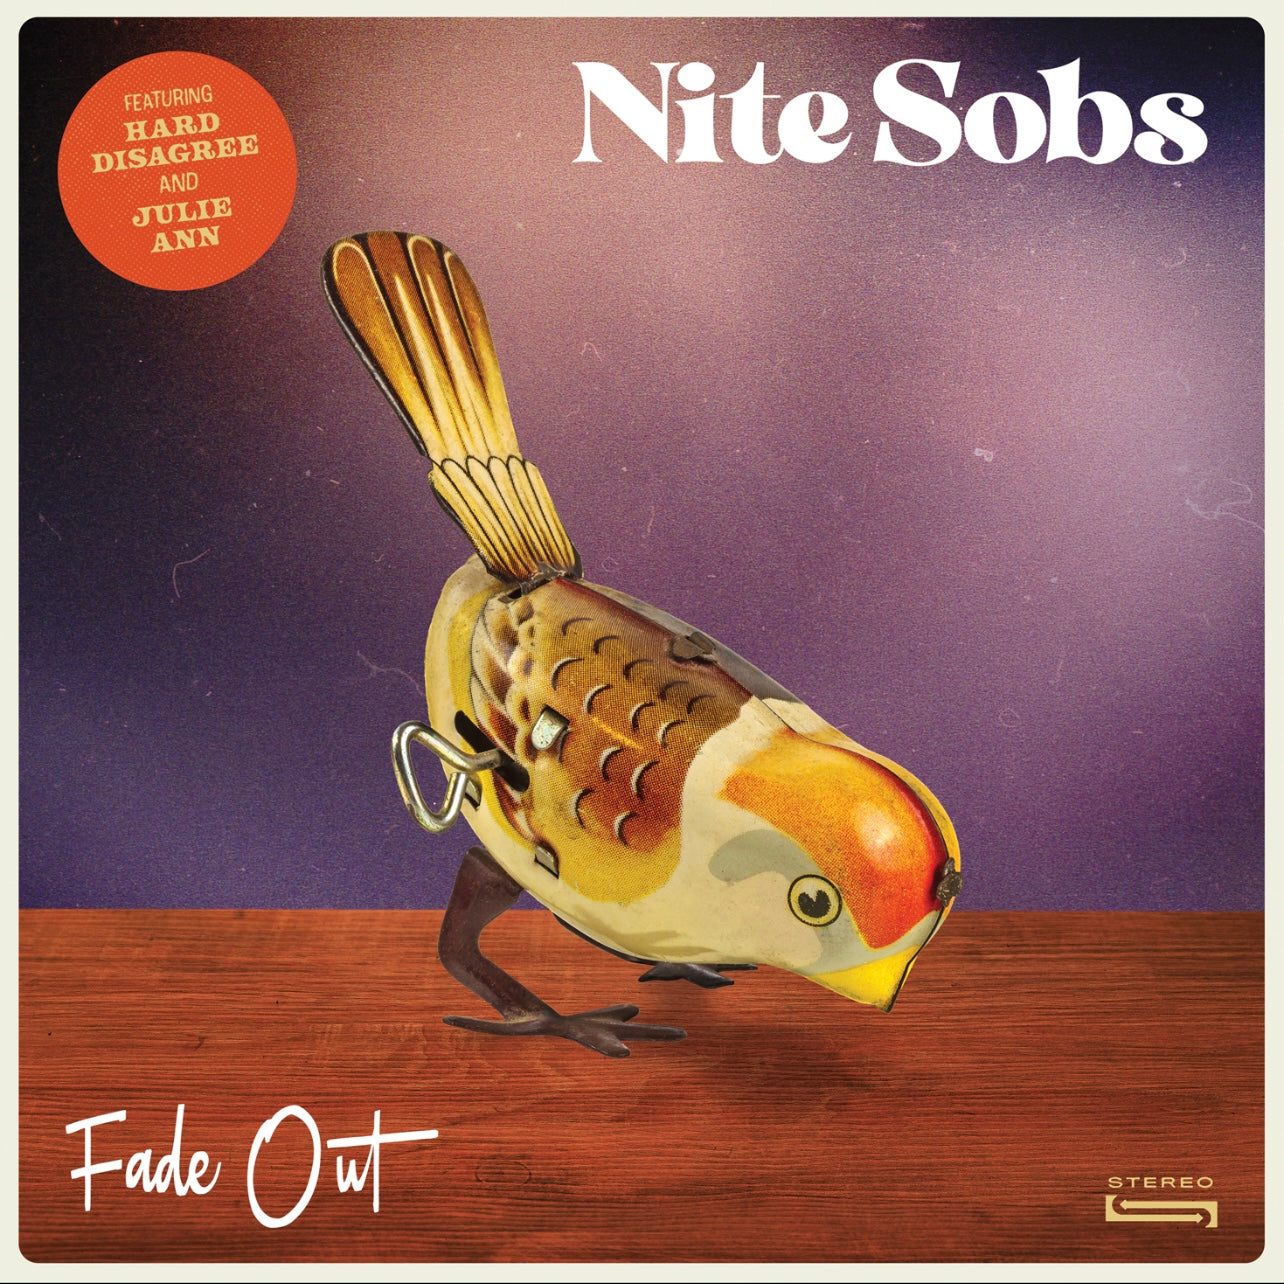 OMR-101 Nite Sobs “Fade Out” LP